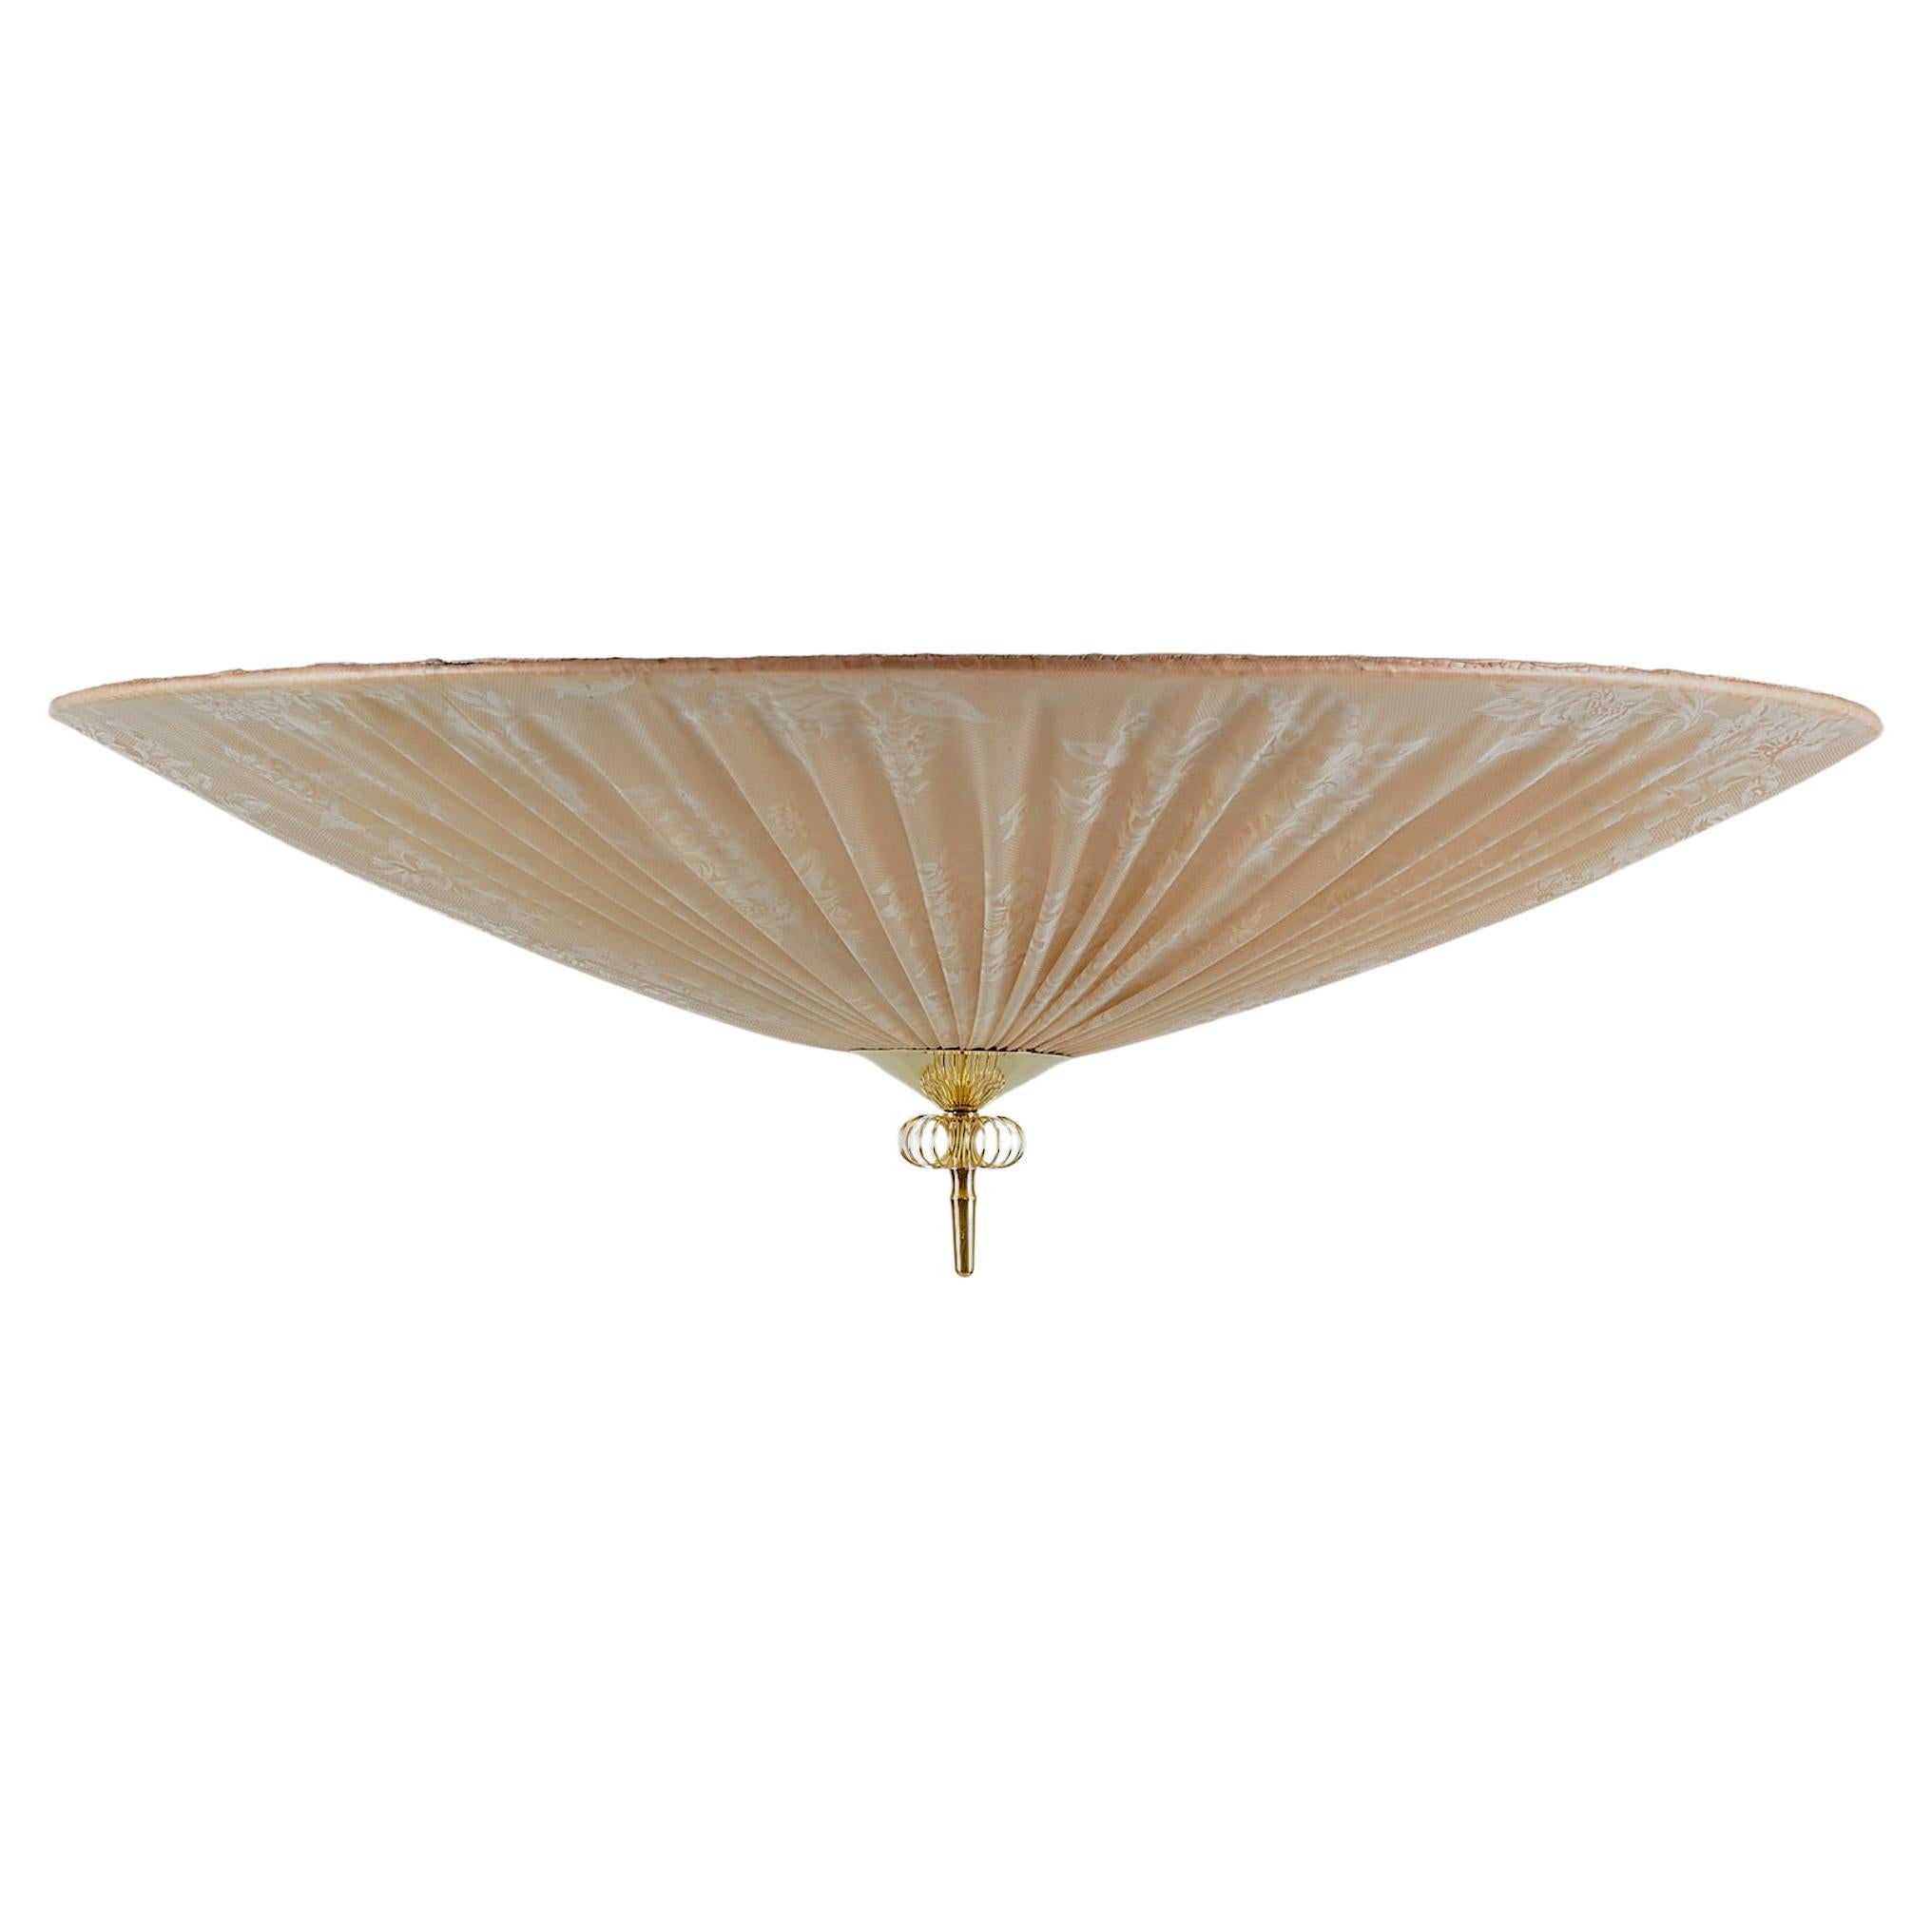 Large ceiling light by Paavo Tynell, Model 1076, Idman.